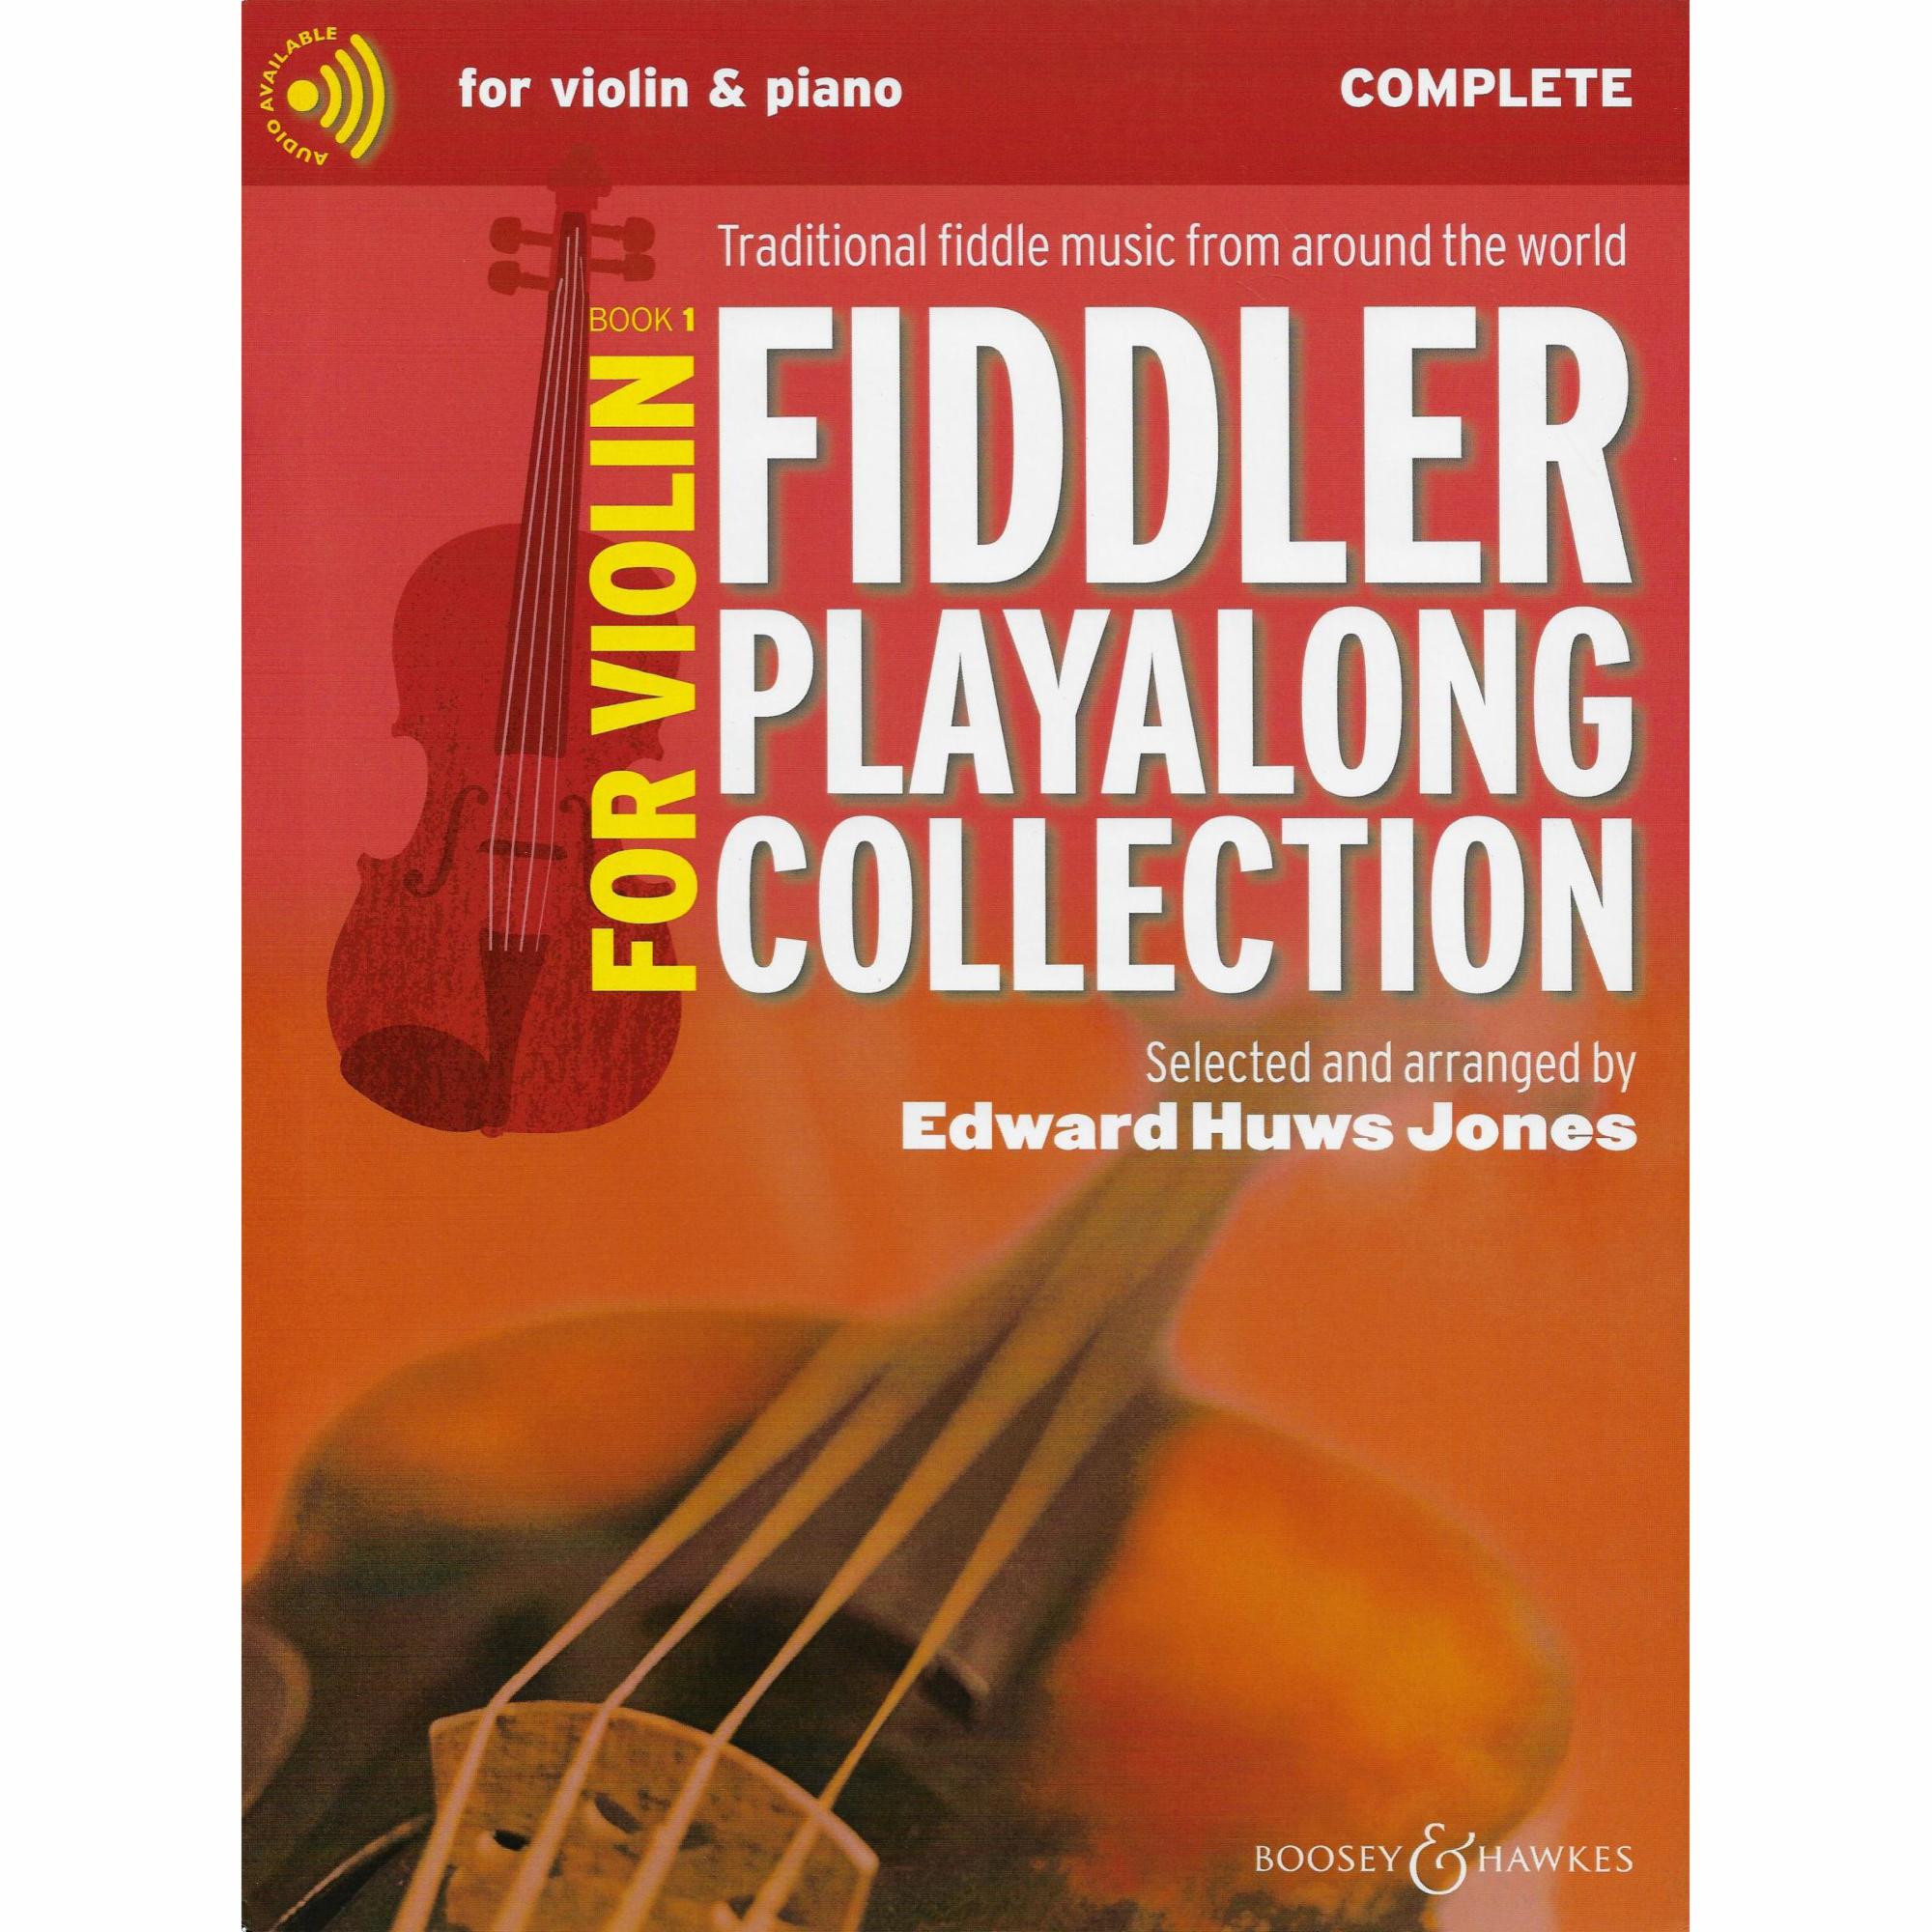 Fiddler Playalong Collection for Violin